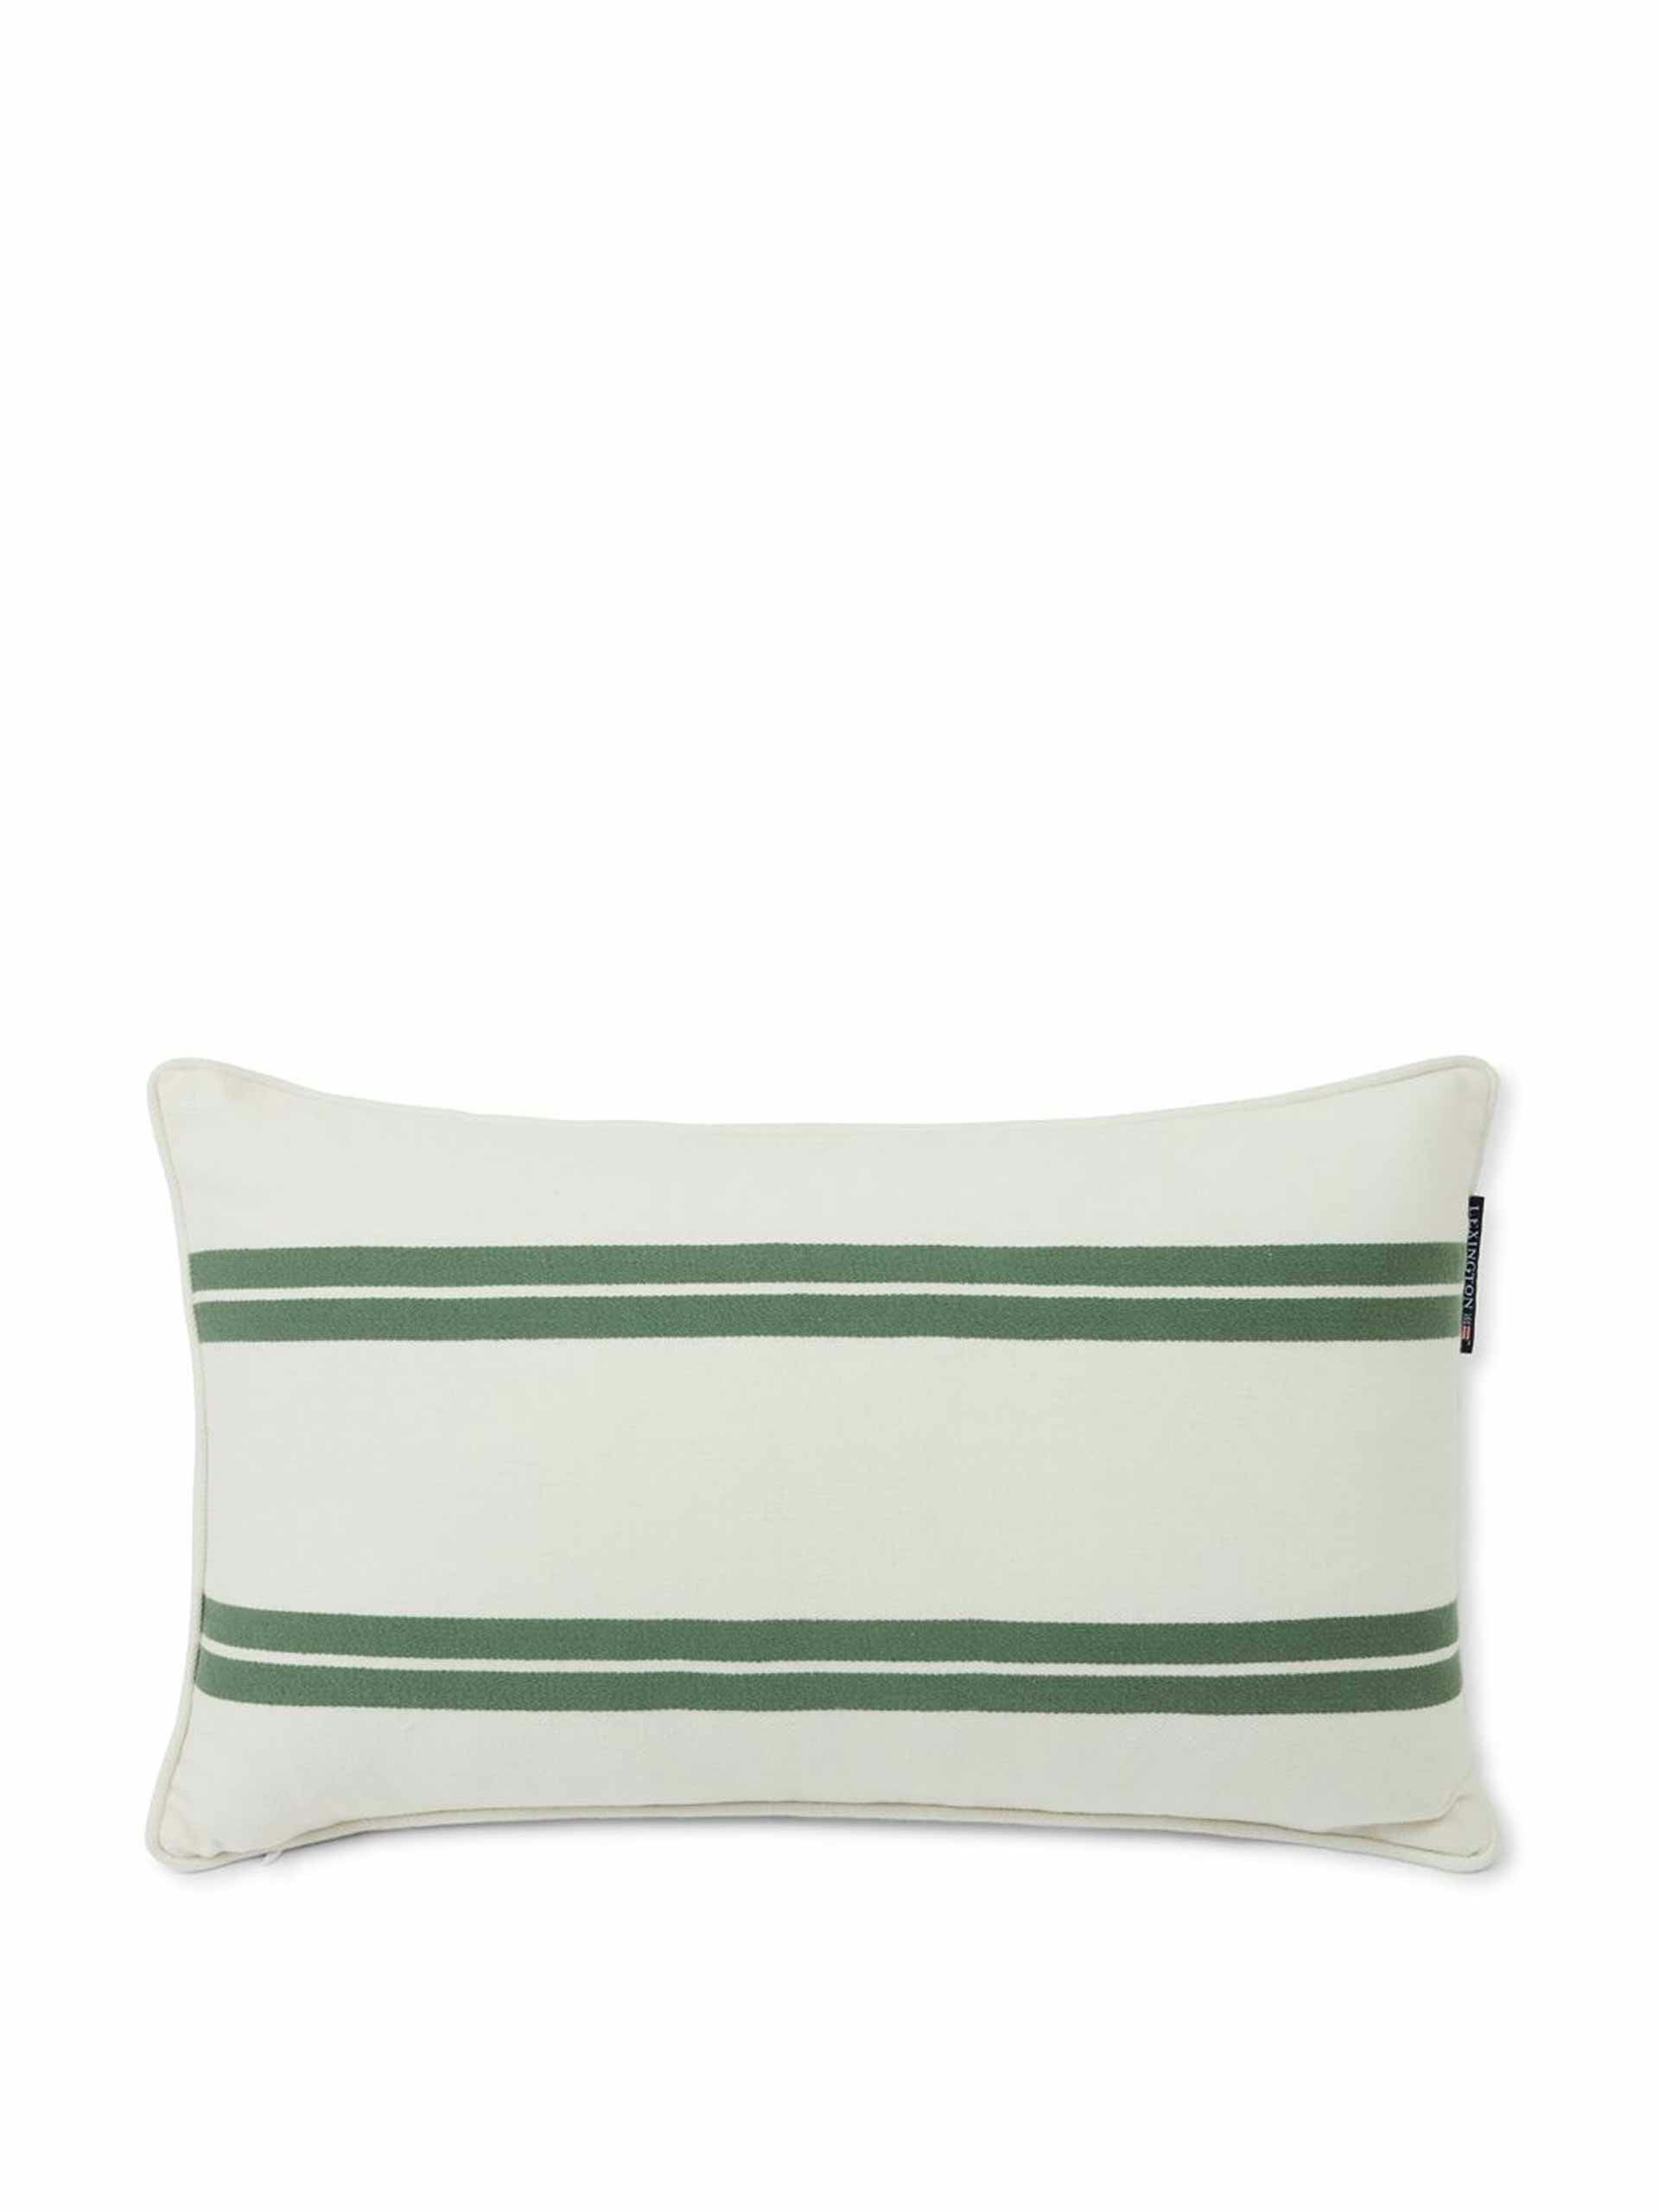 Green and white striped cushion cover